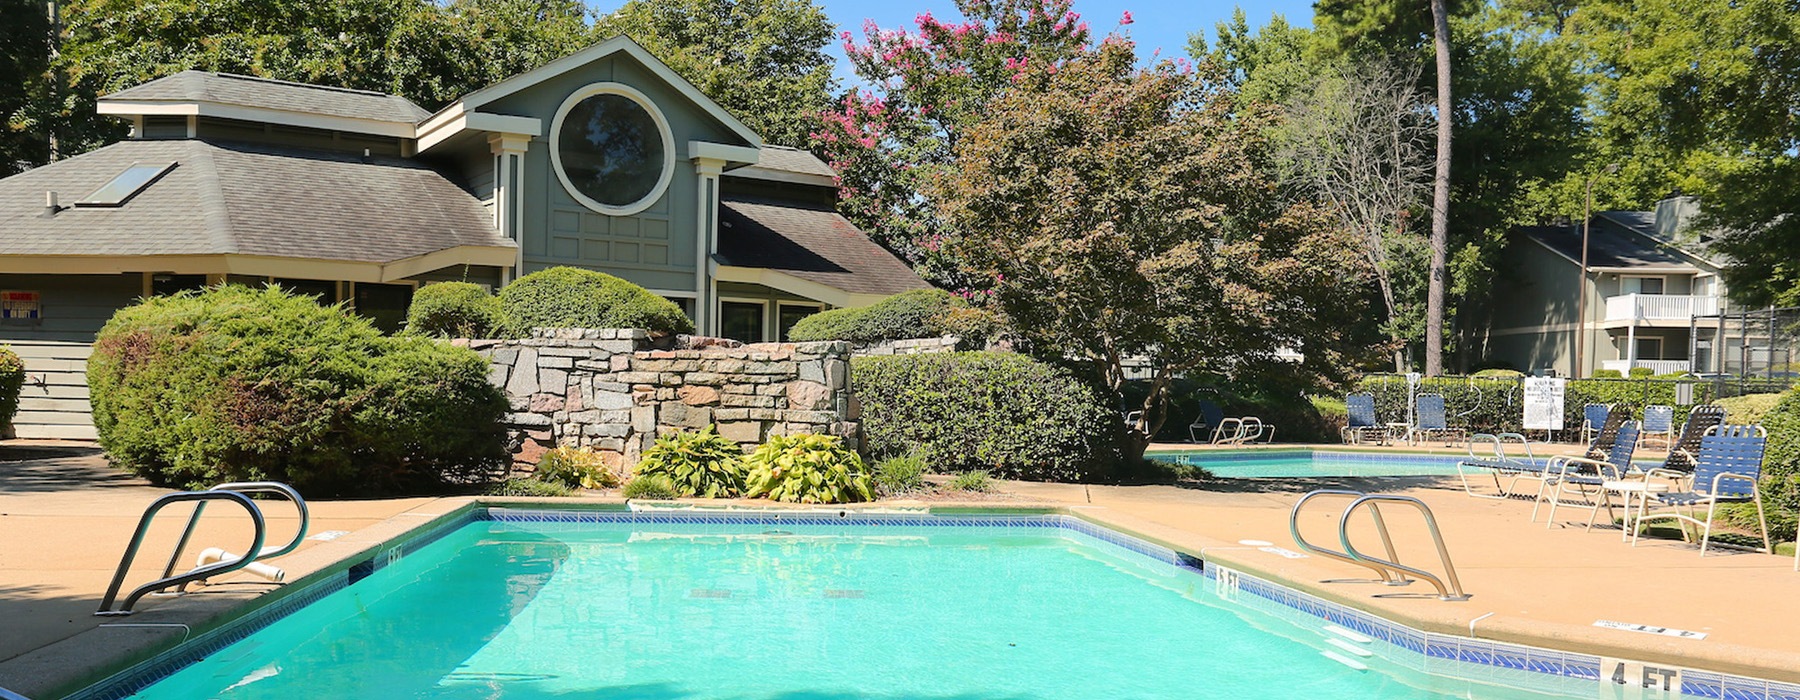 Pool area surrounded by trees